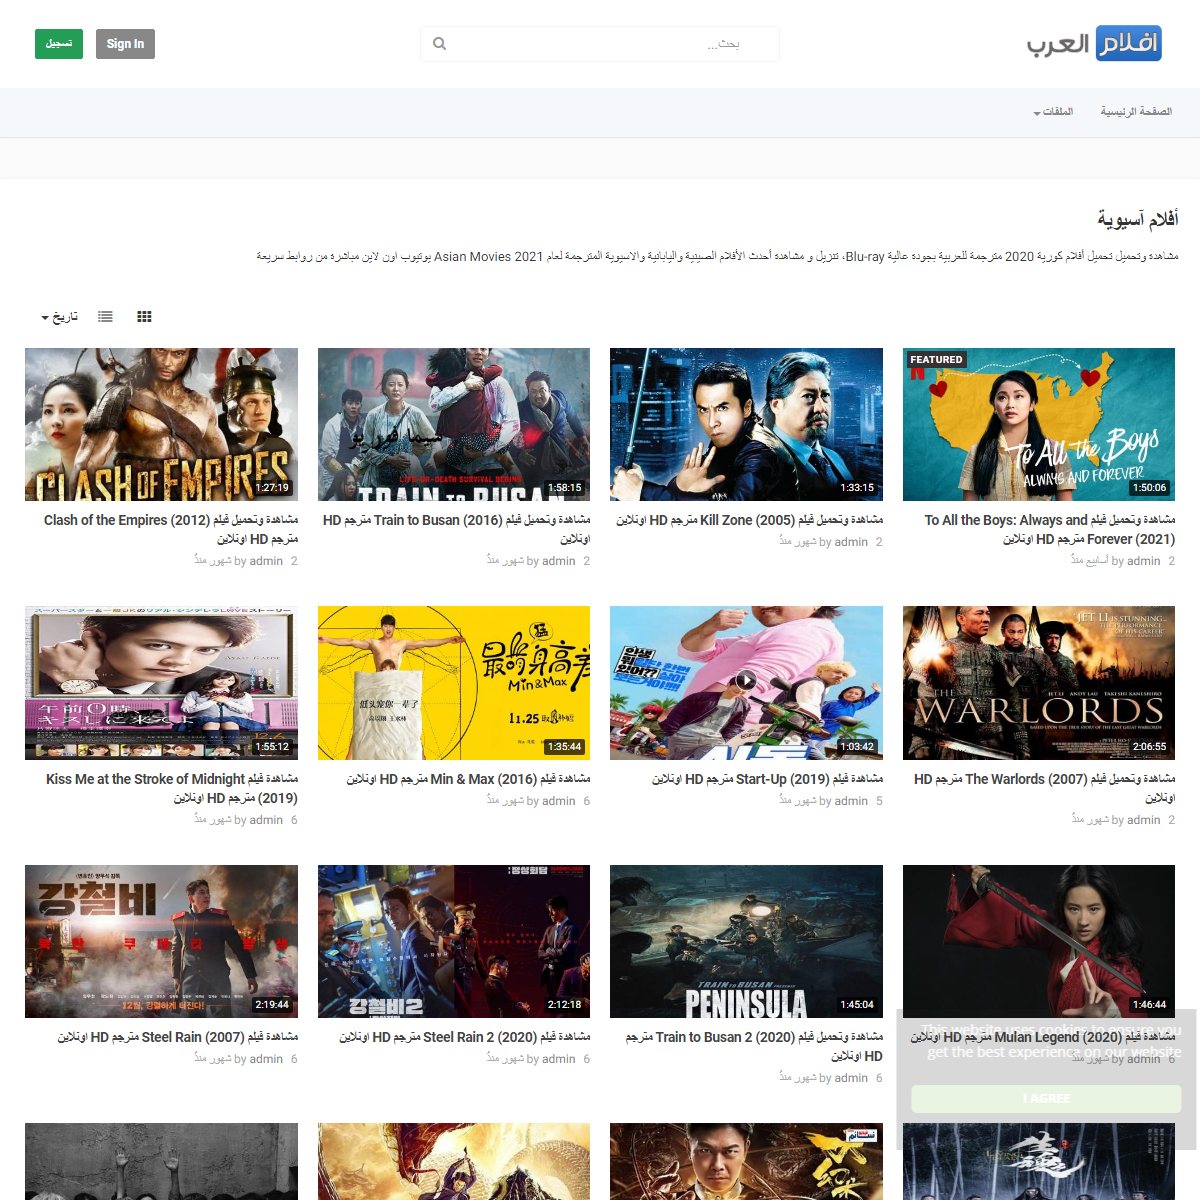 A complete backup of https://arab-moviez.tv/category.php?cat=asian-movies&page=1&sortby=date